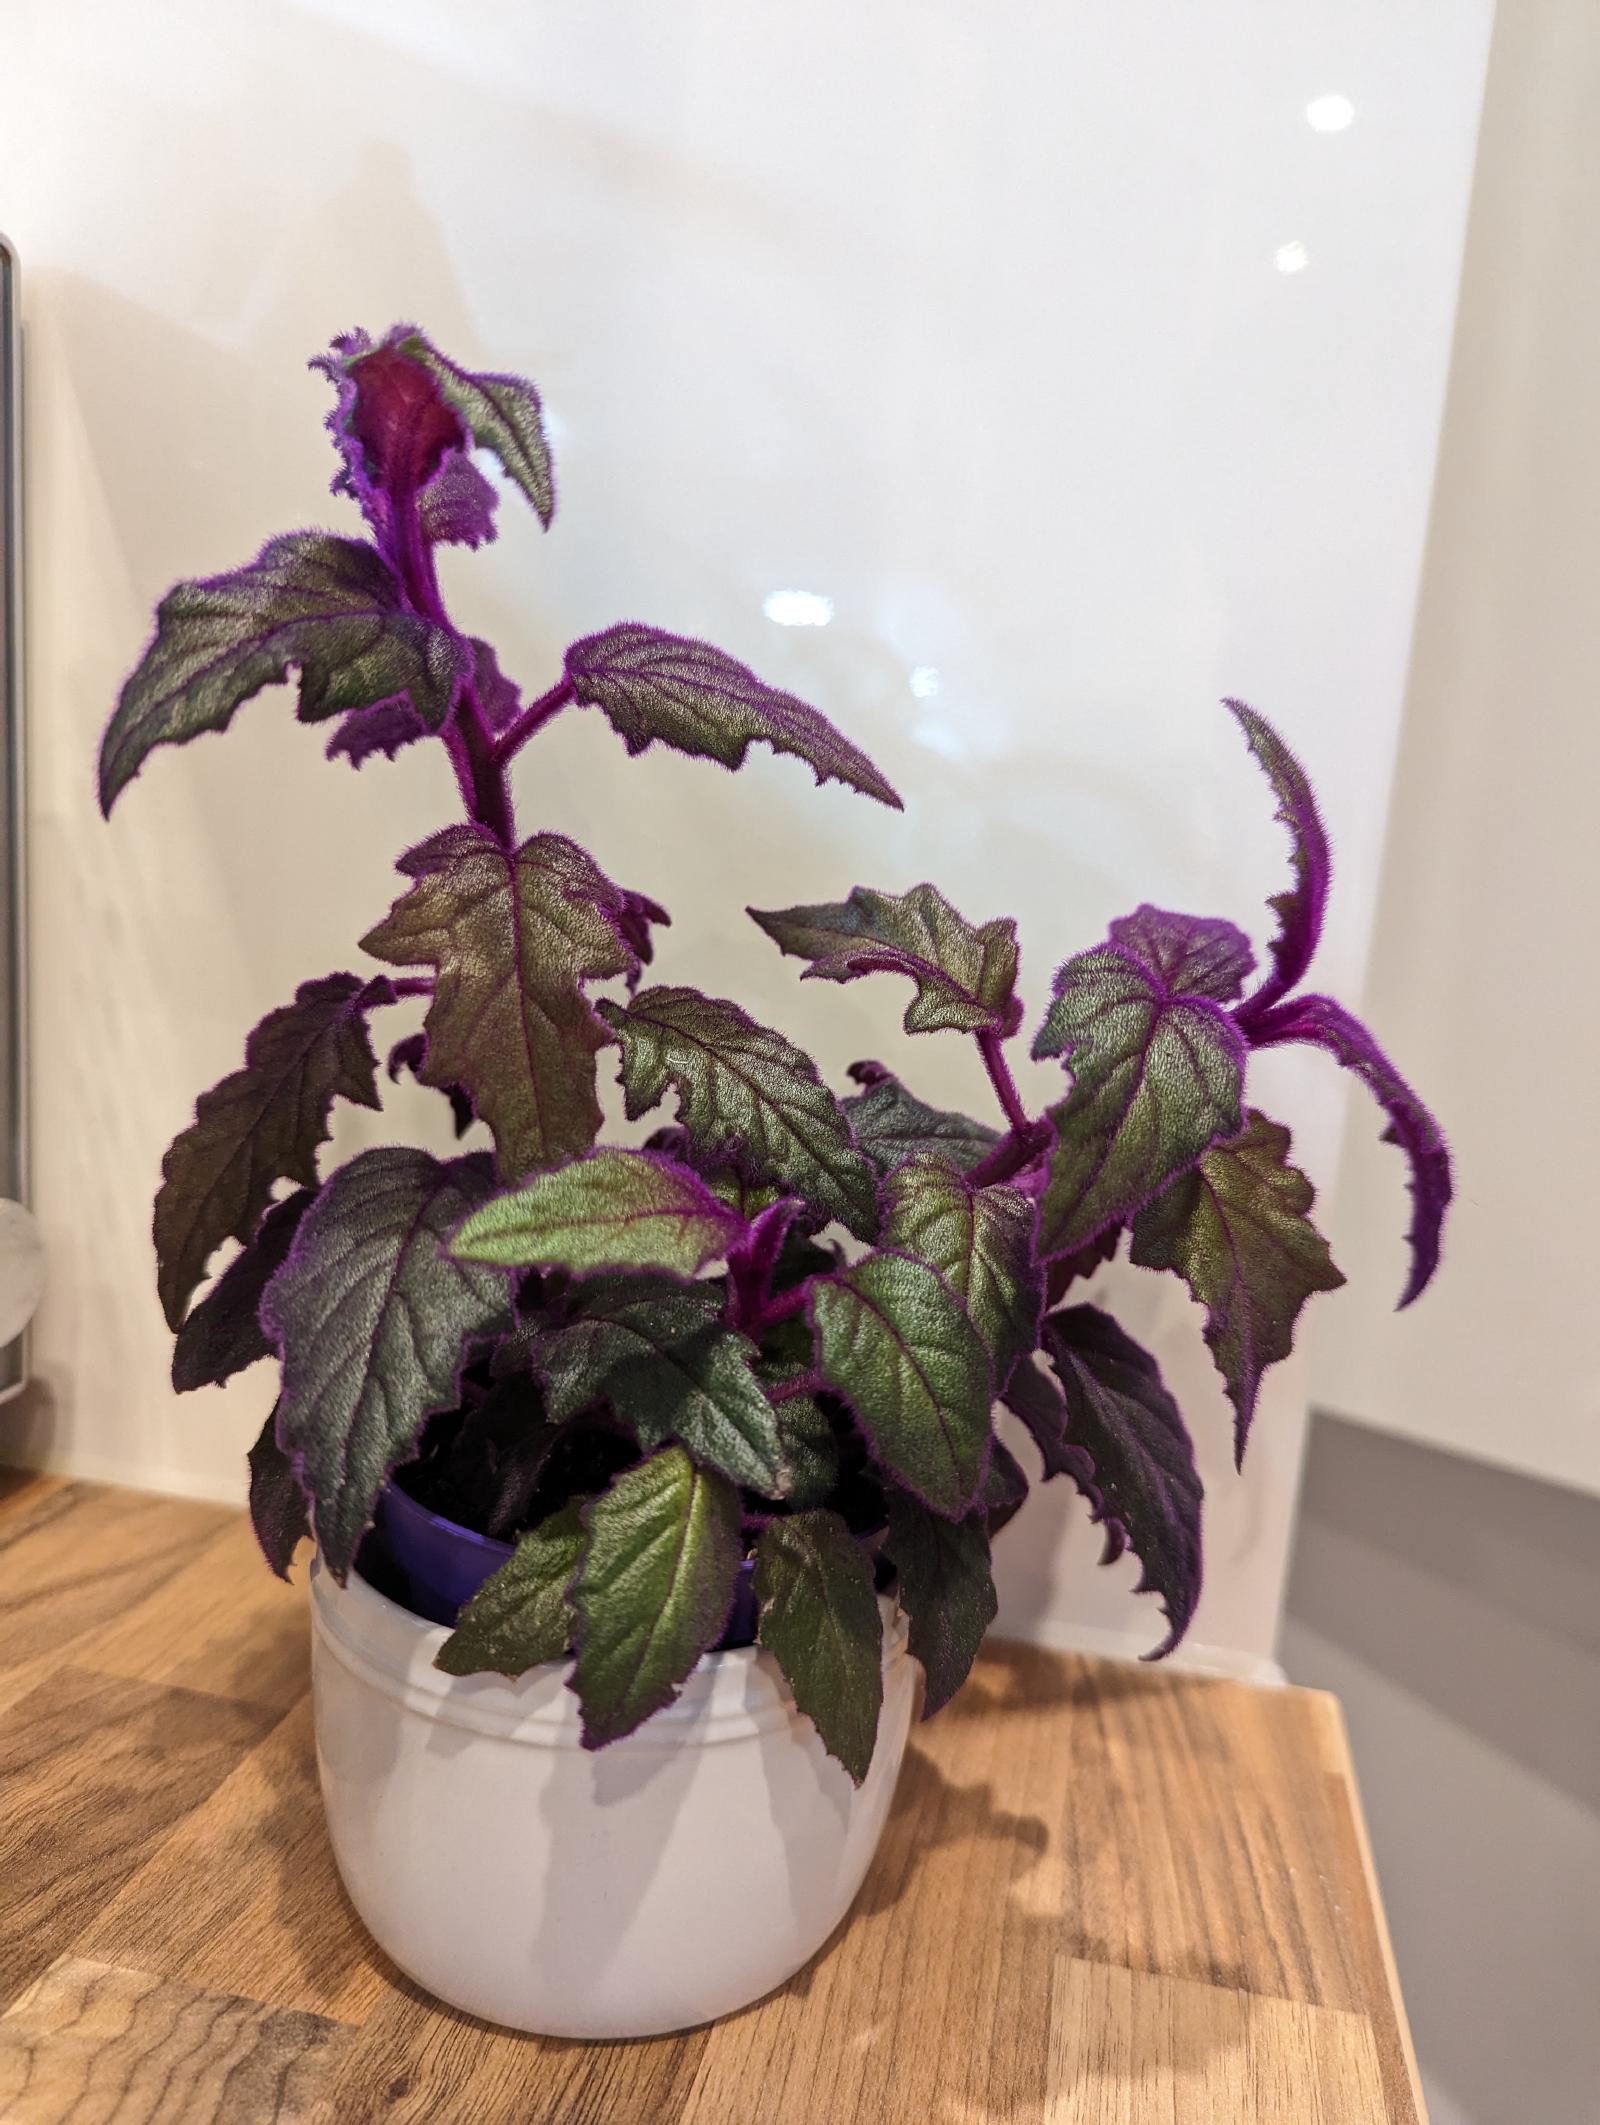 Picture of purple passion plant sitting on kitchen counter. The plant has two long stems and several shorter ones. The stems and the top leaves are deep purple and the lower leaves are more green.